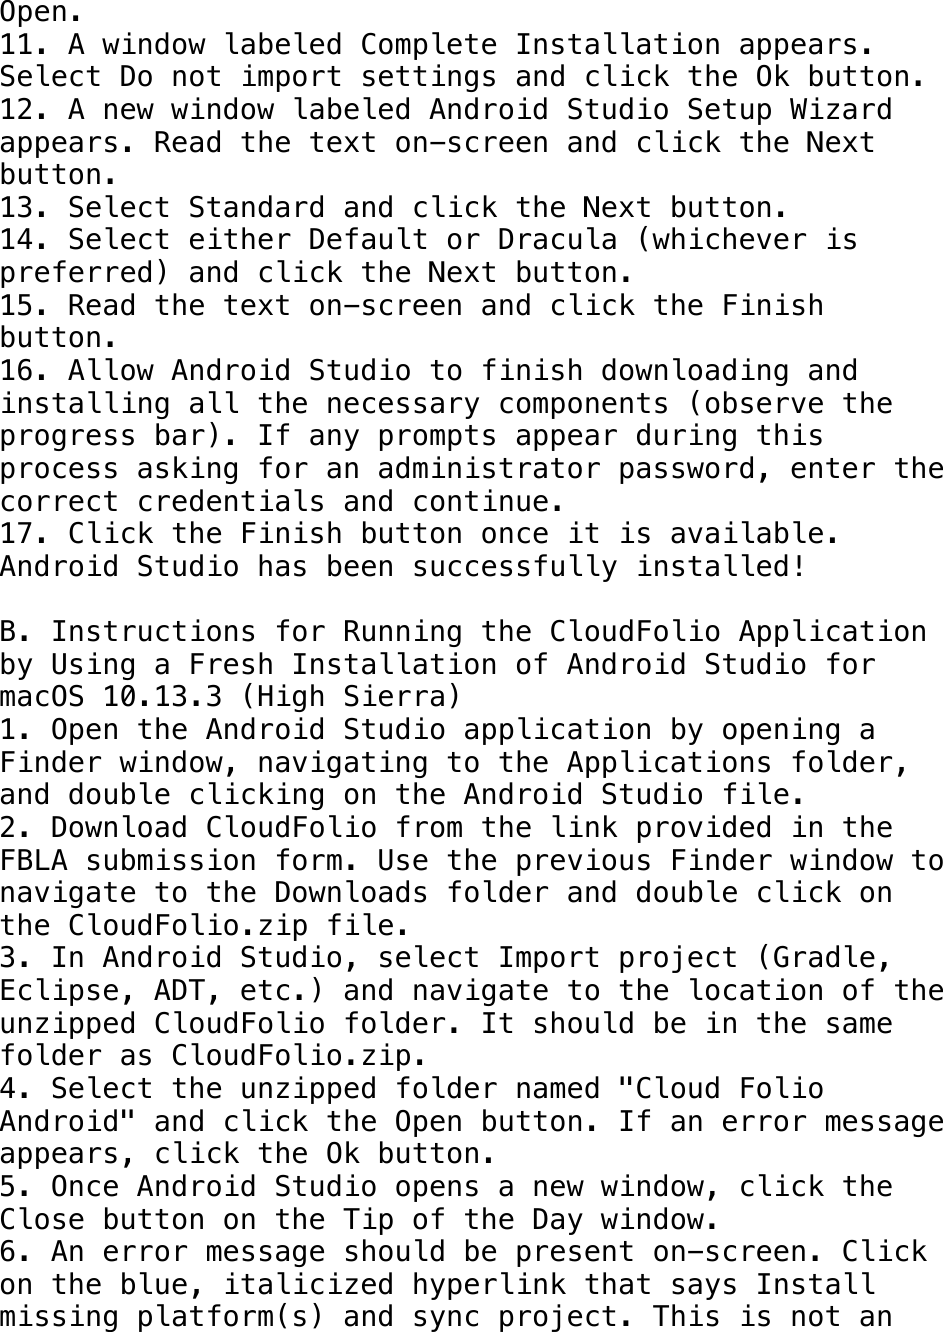 Page 6 of 10 - Cloud Folio Instructions